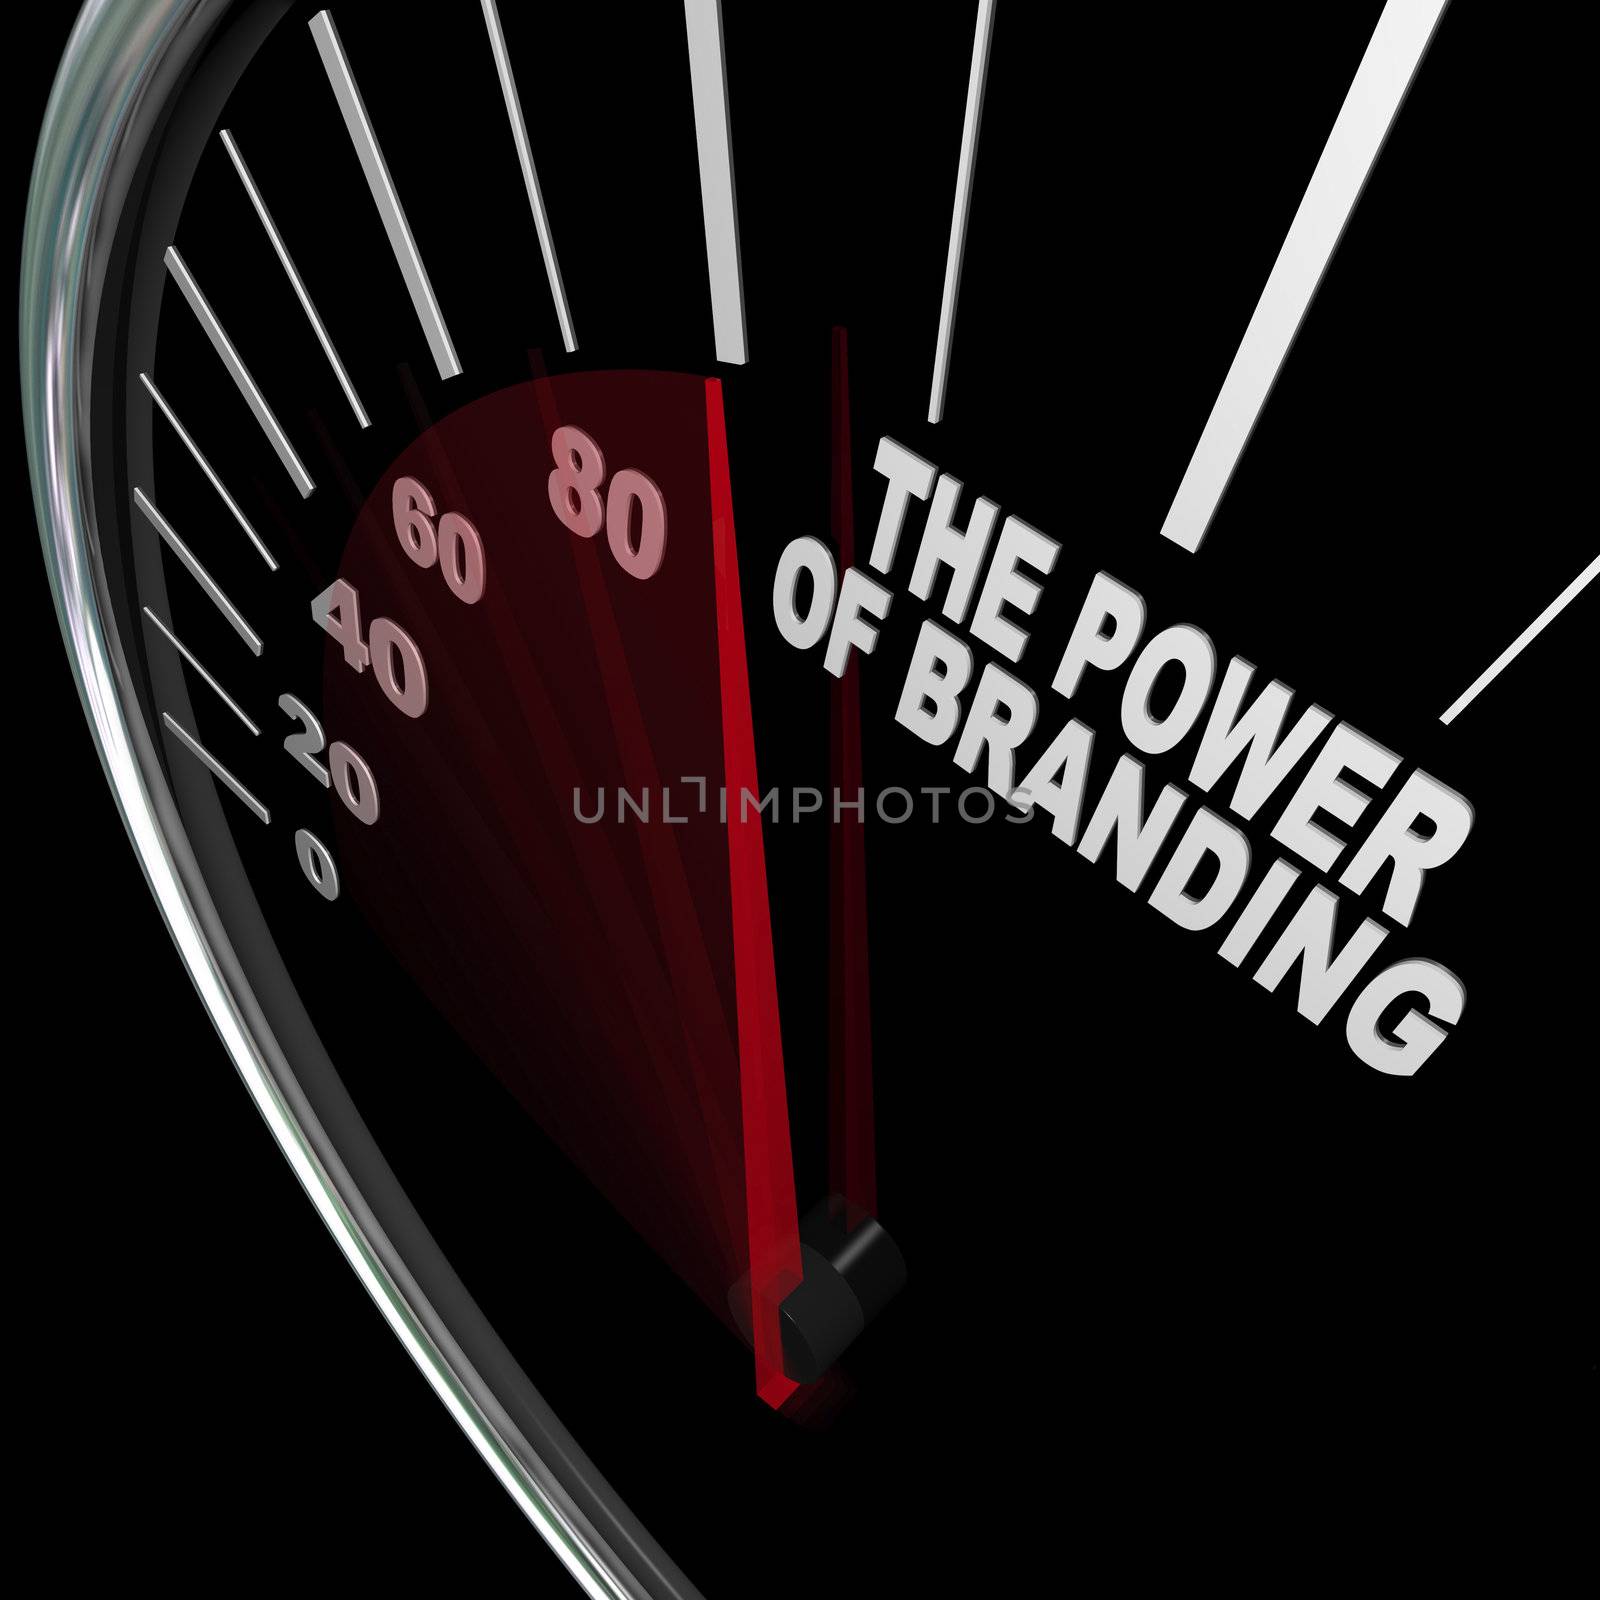 The power of branding measured by a speedometer representing the high level of loyalty a customer feels toward a company, business or product it loves and trusts